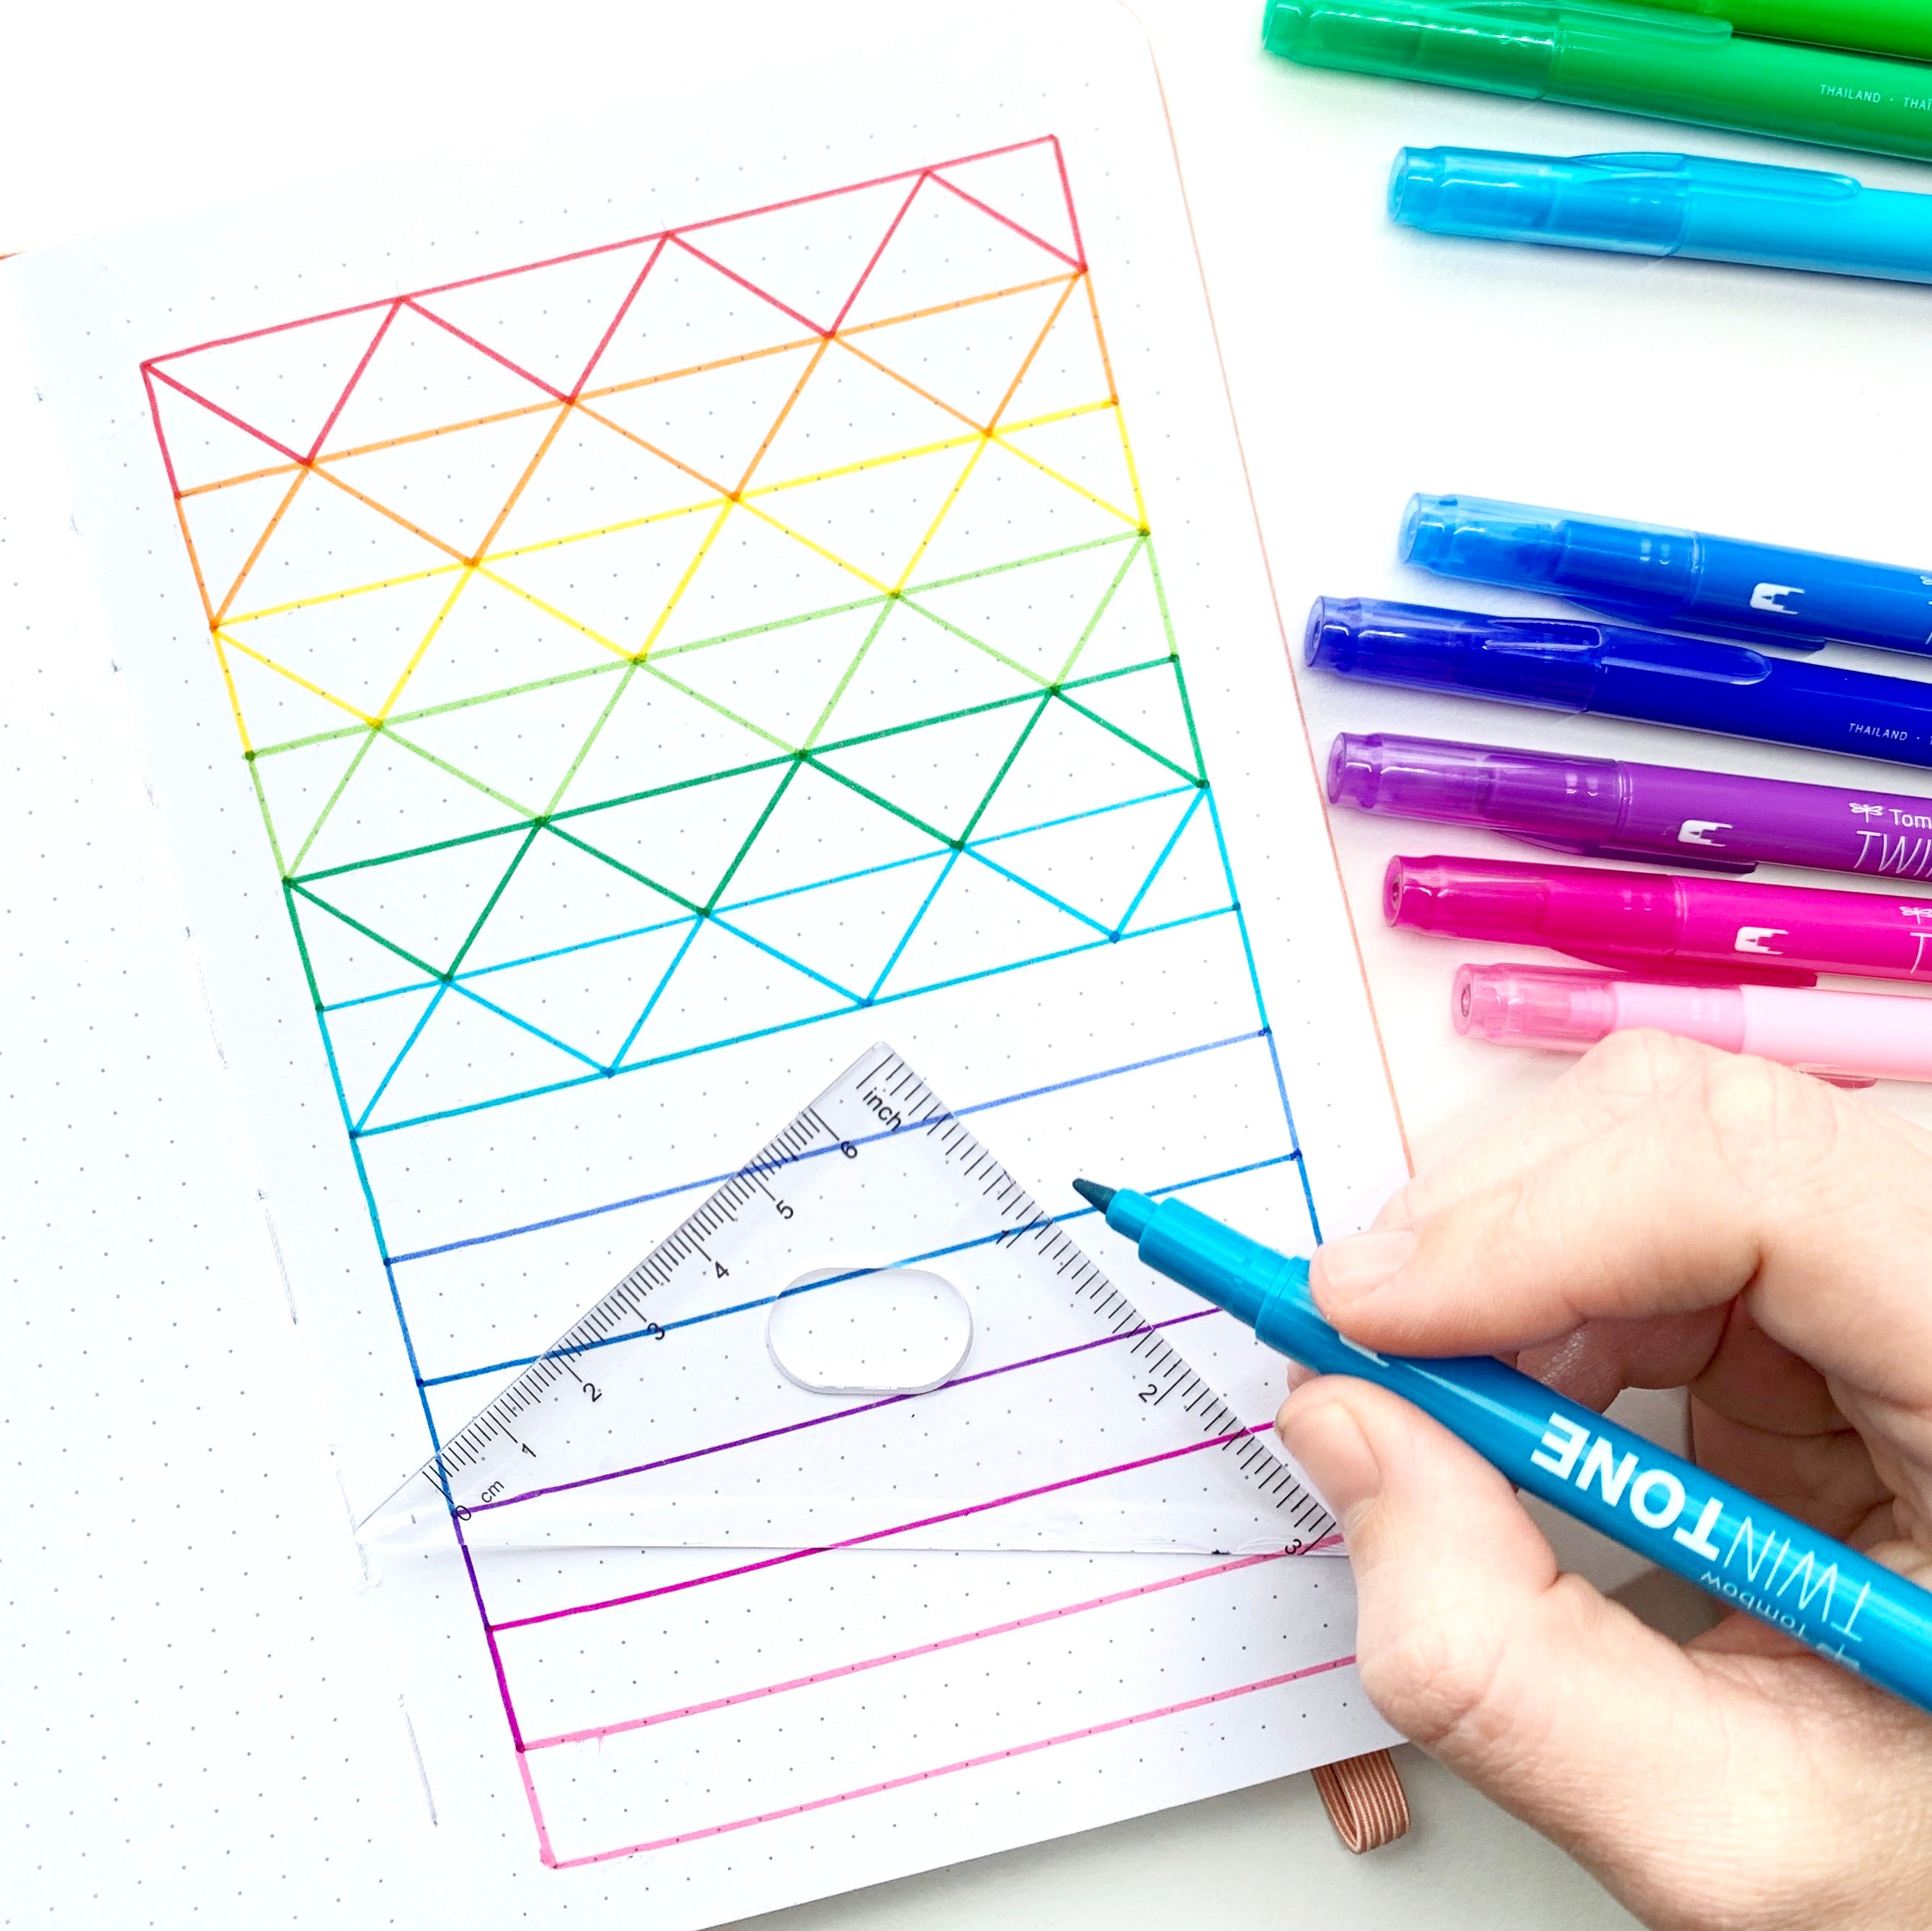 Learn how to create a rainbow pattern in your dot grid notebook with Adrienne from @studio80design